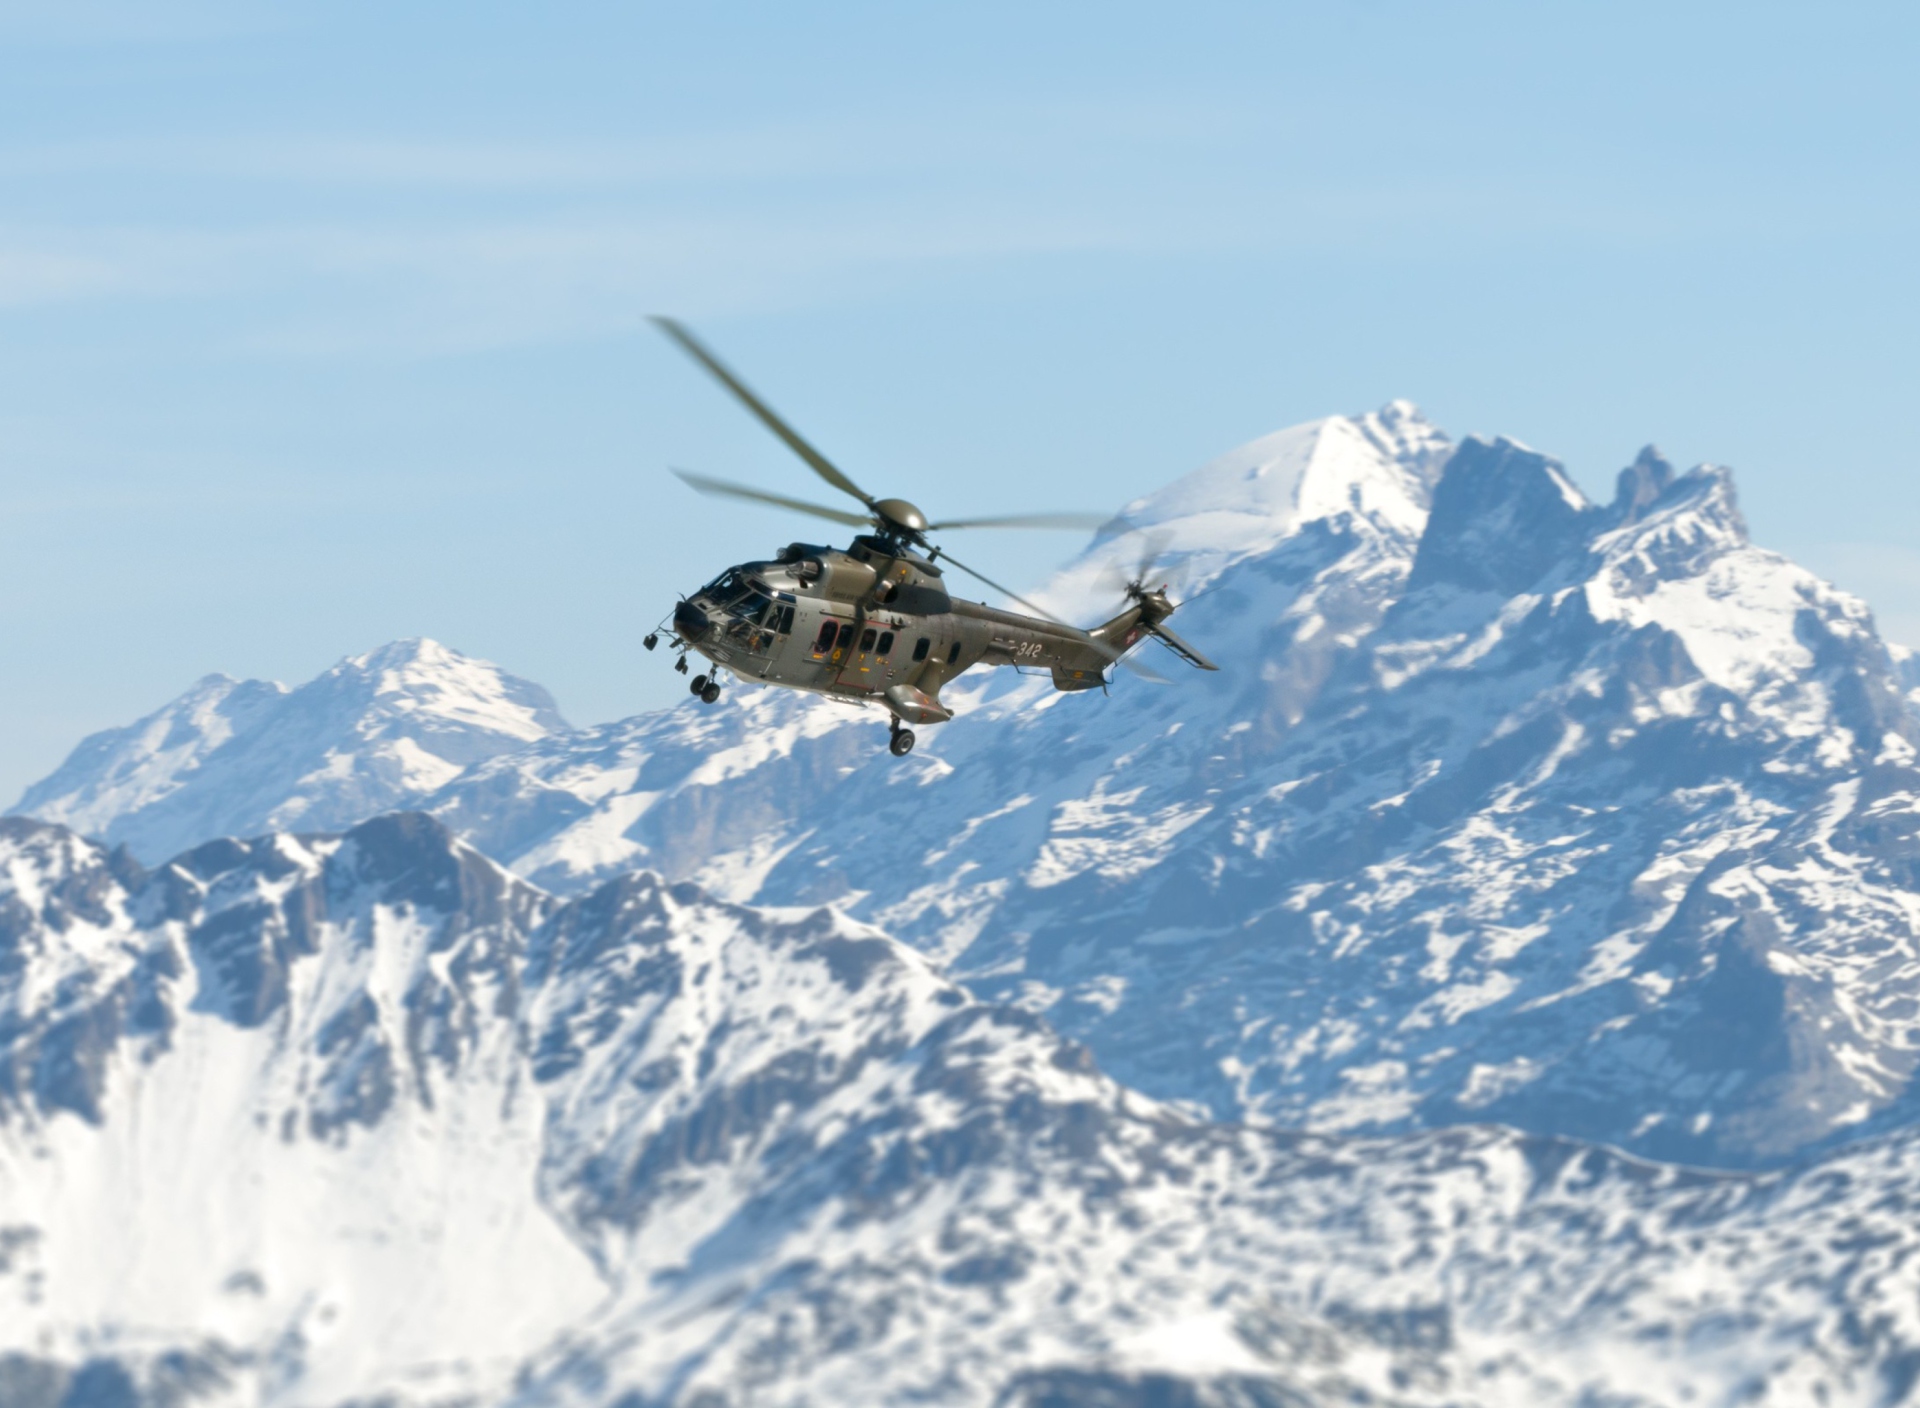 Helicopter Over Snowy Mountains screenshot #1 1920x1408